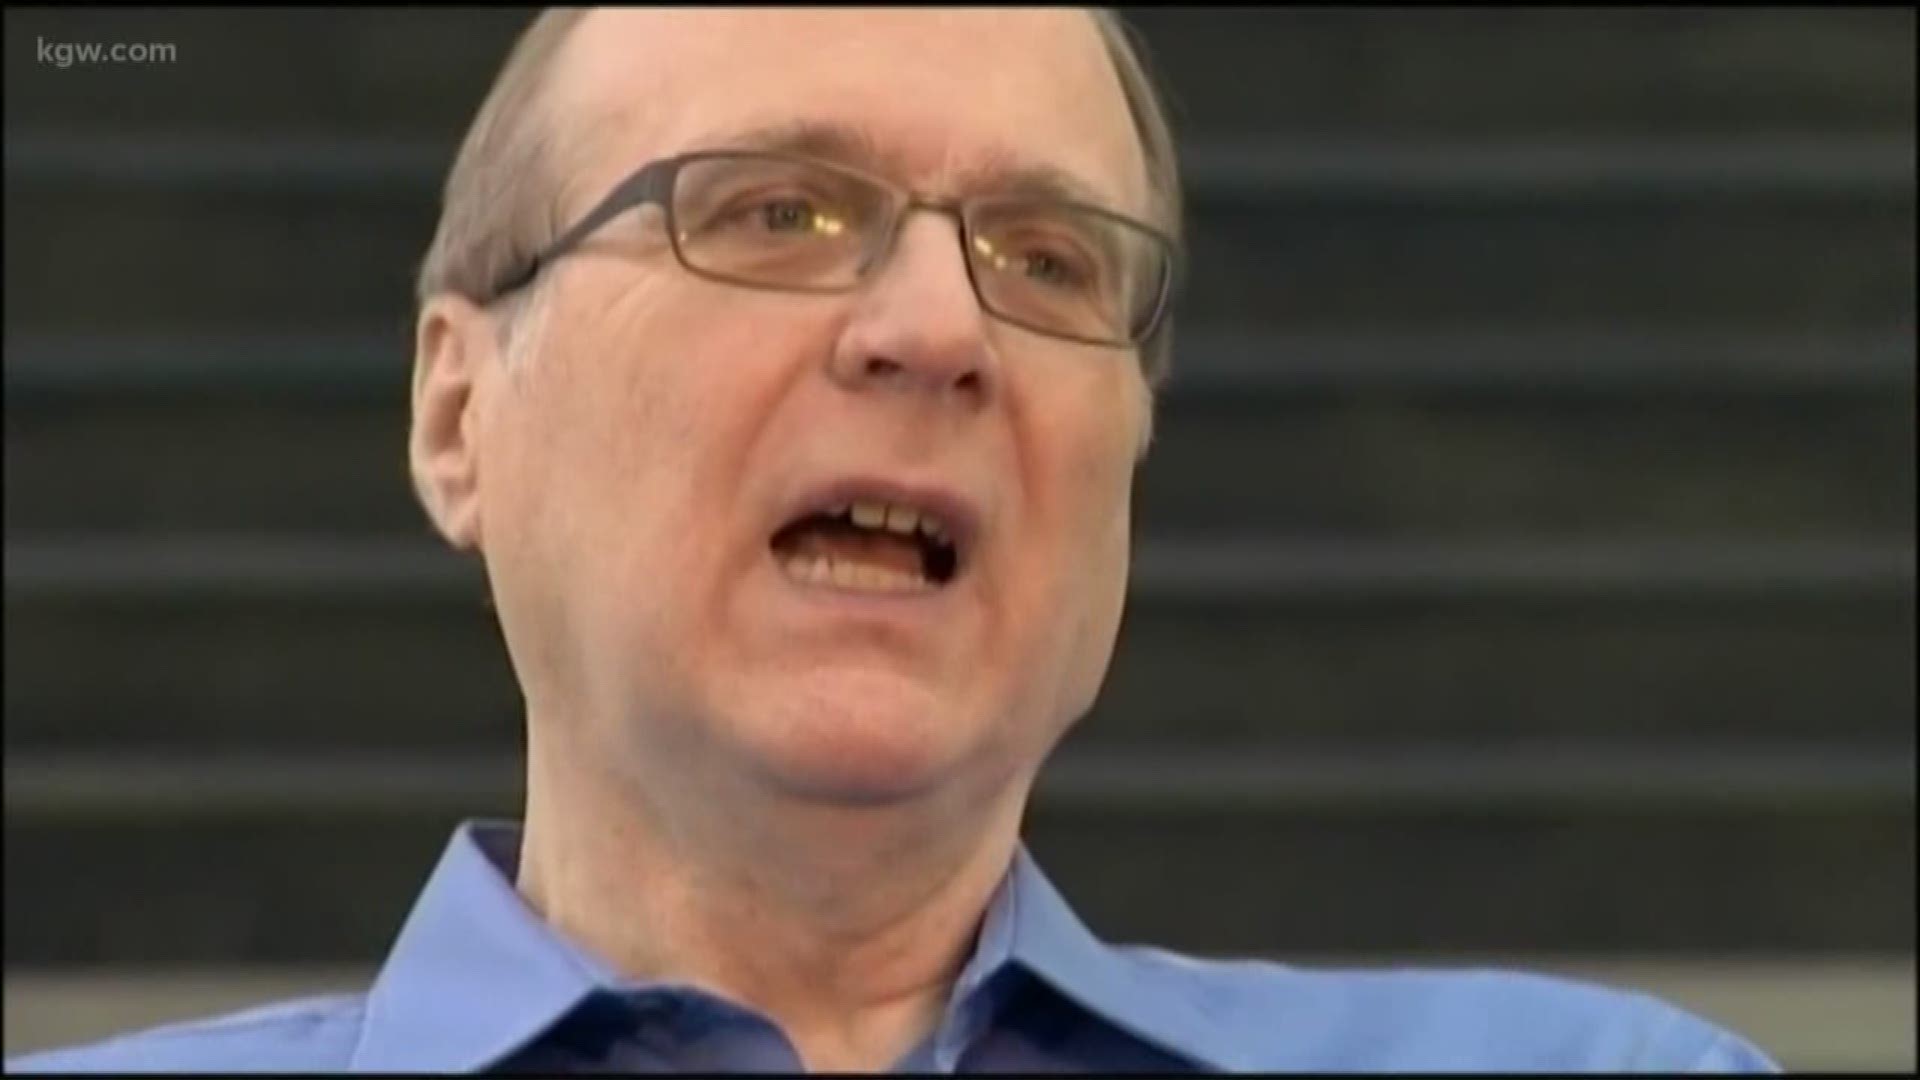 Portland Trail Blazers owner and Microsoft co-founder Paul Allen has died.